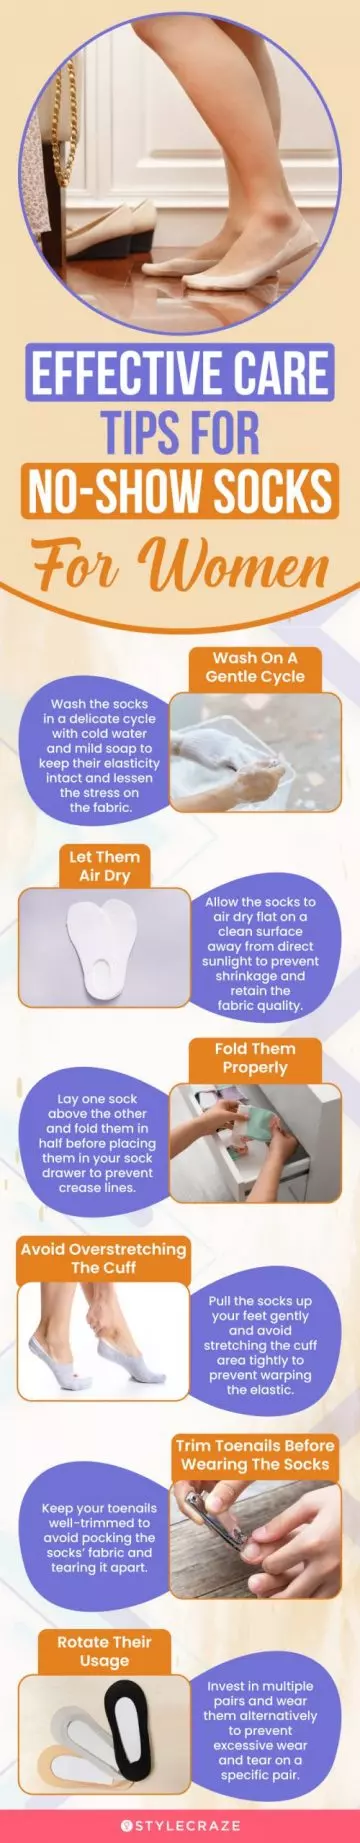 Effective Care Tips For No-Show Socks For Women (infographic)